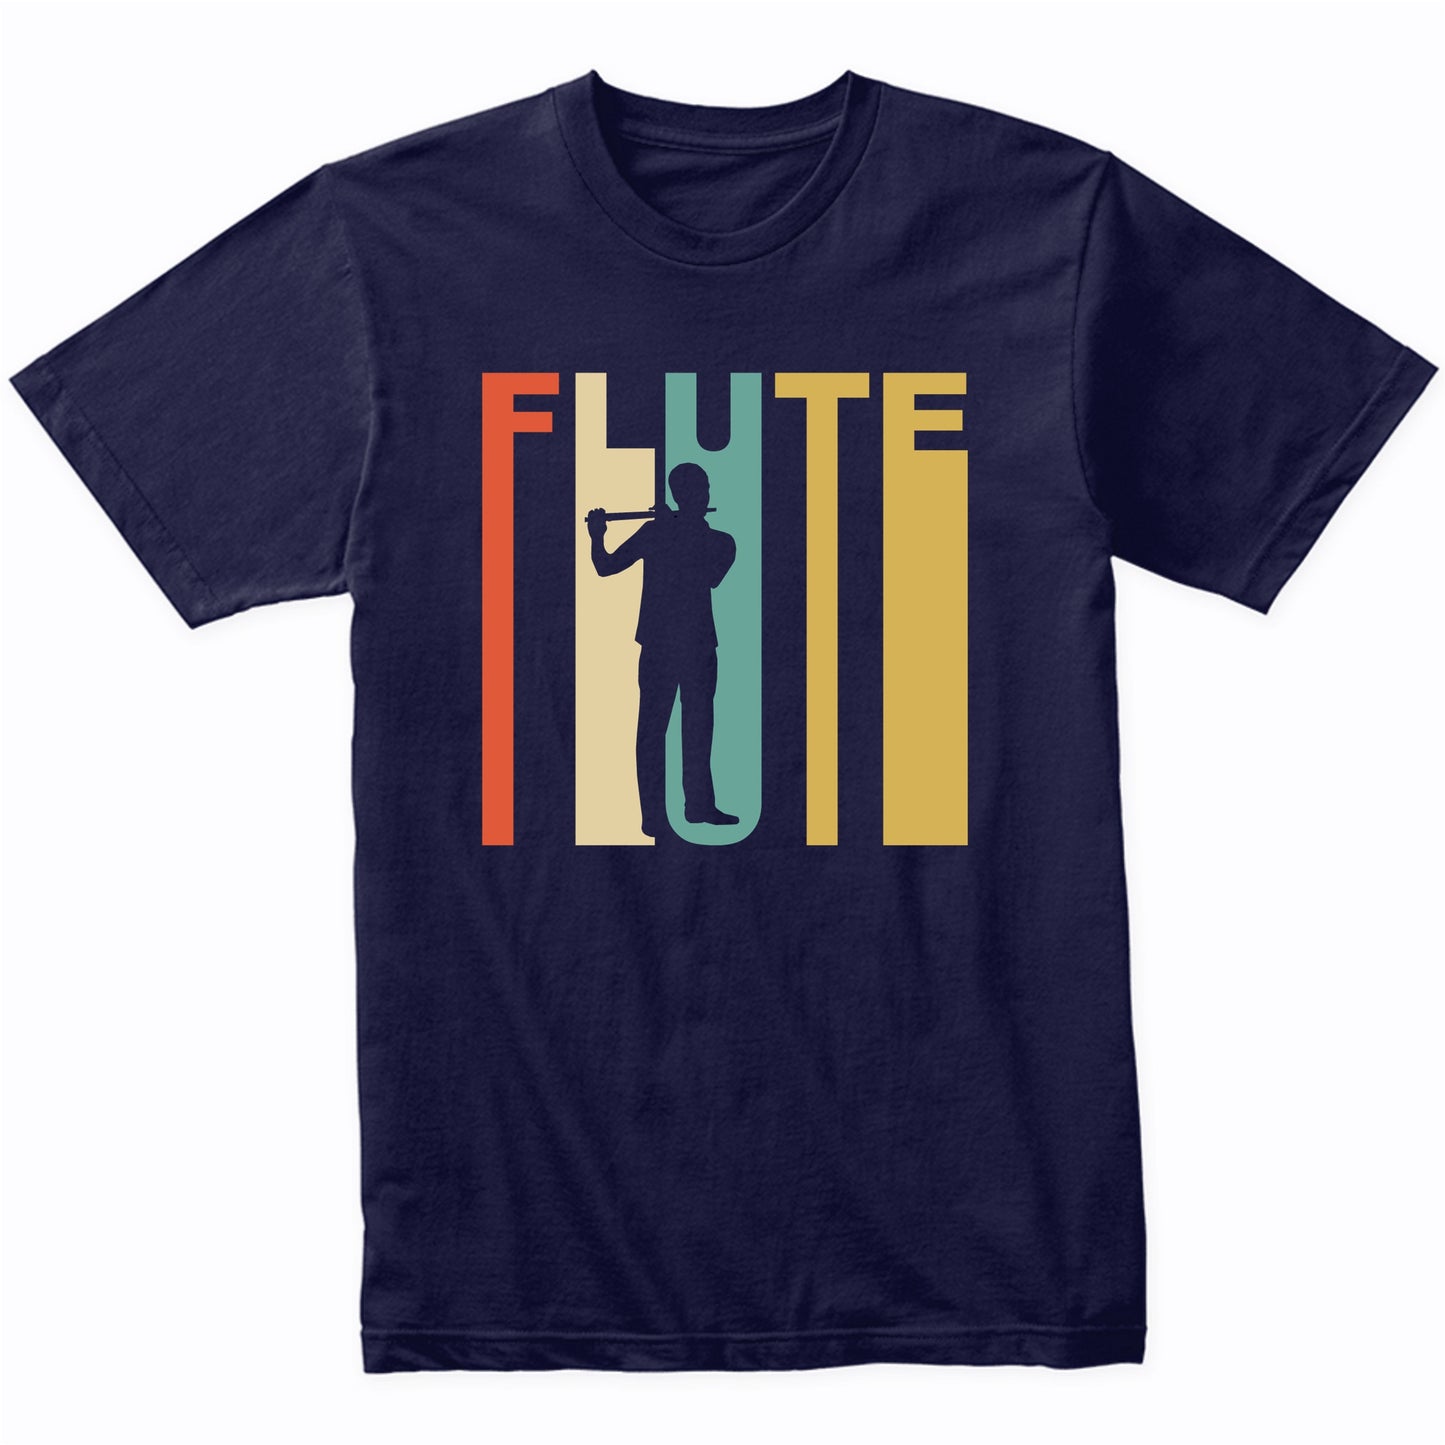 Retro 1970's Style Flute Player Silhouette Music T-Shirt